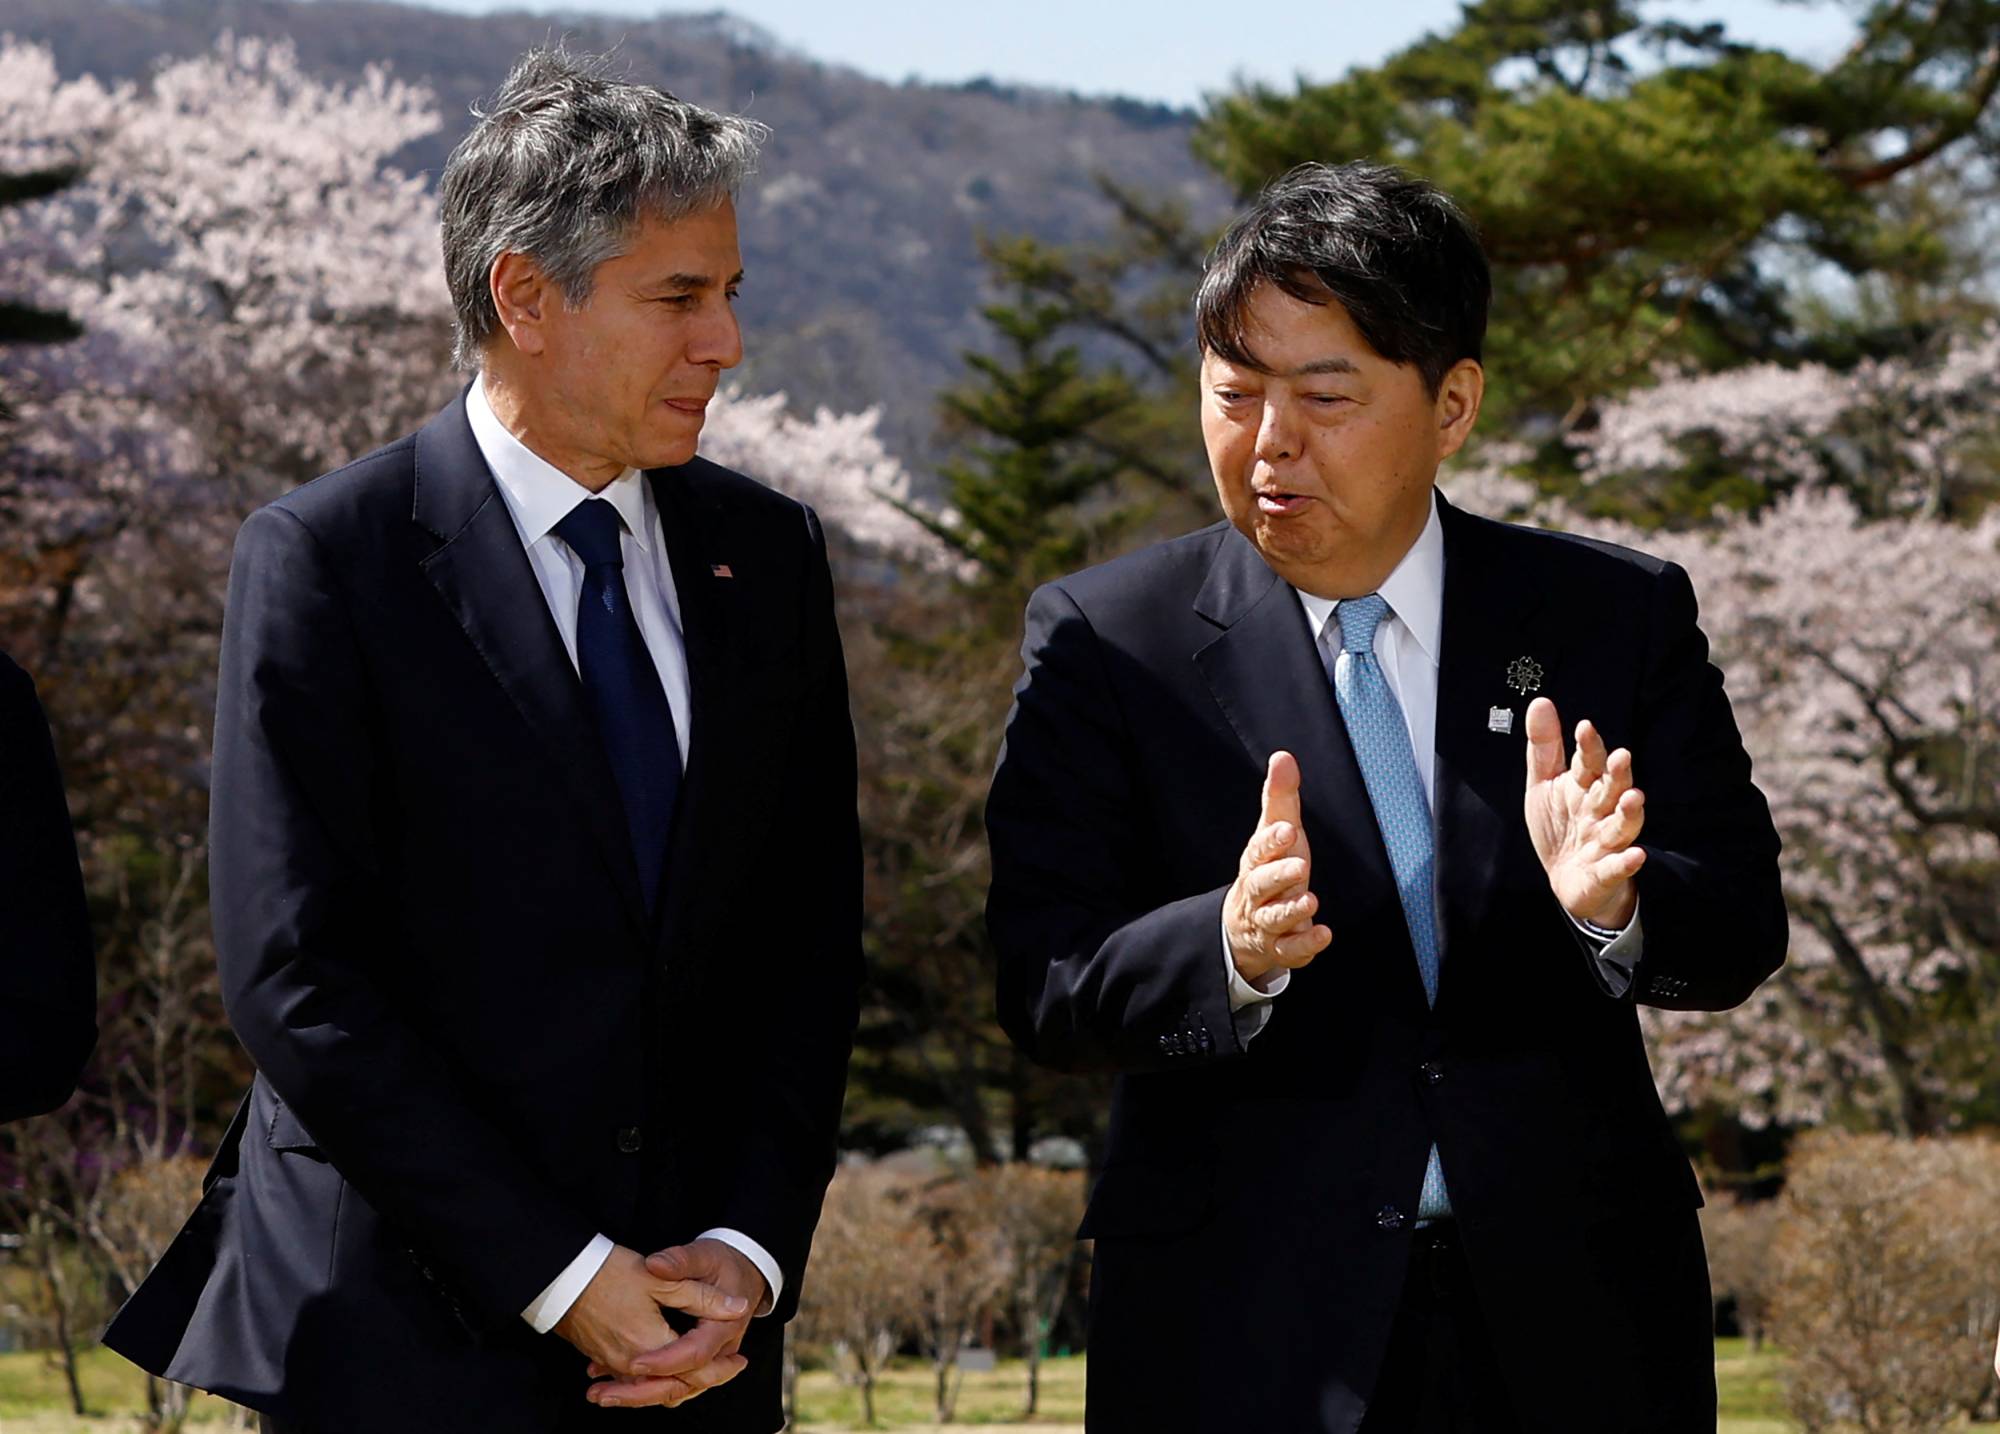 Foreign Minister Yoshimasa Hayashi speaks with U.S. Secretary of State Antony Blinken on the sidelines of the Group of Seven foreign ministers' meeting in Karuizawa, Nagano Prefecture, on Monday. | POOL / VIA REUTERS